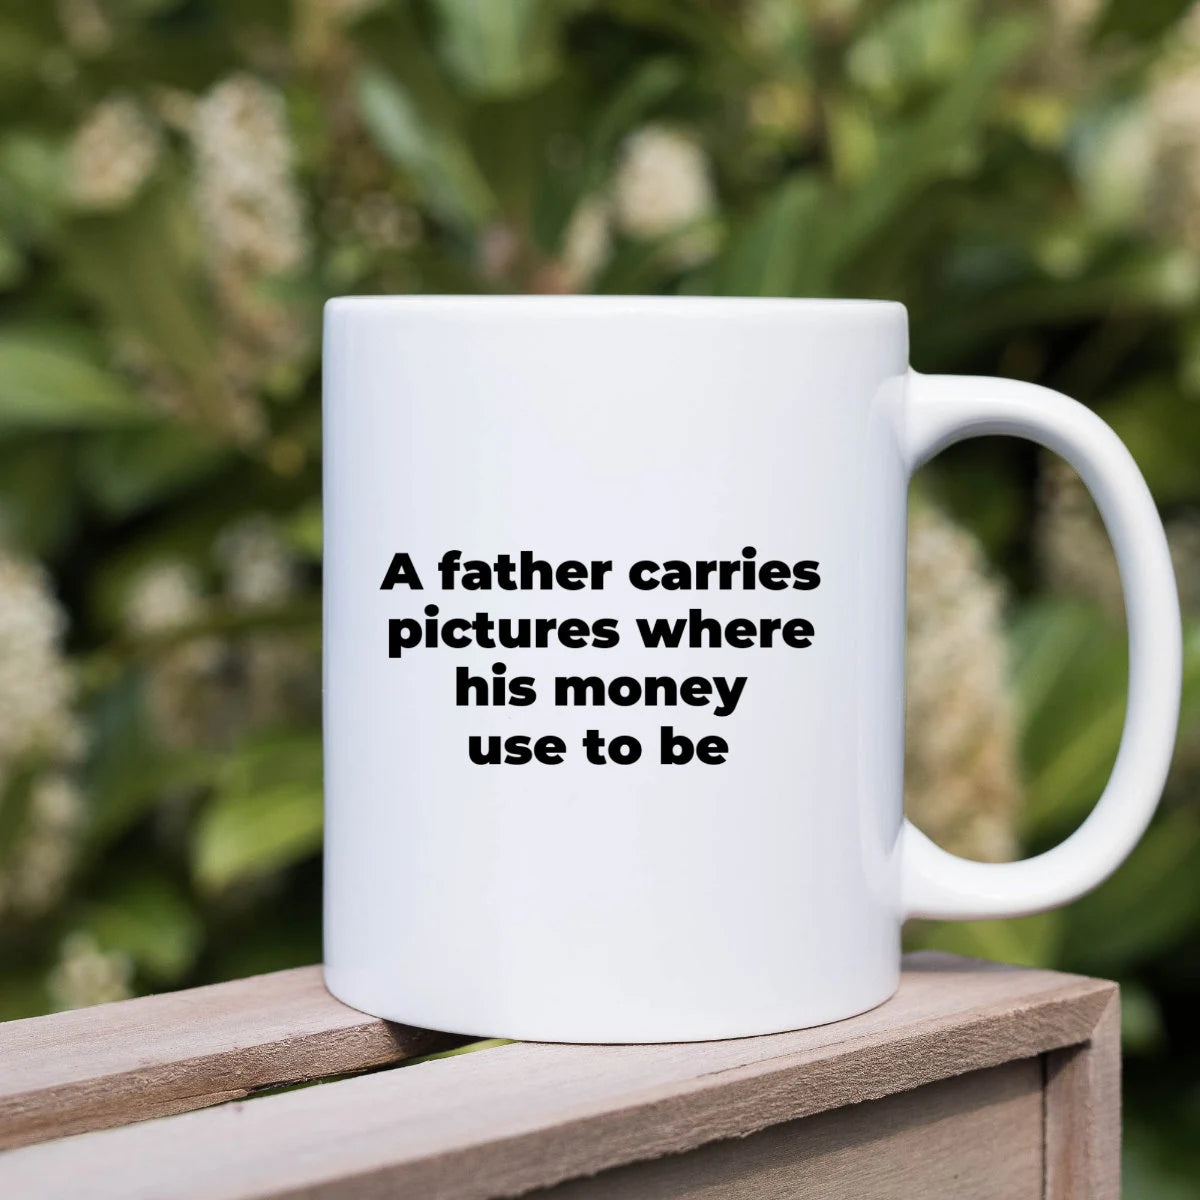 A Father Carries Pictures Where His Money Use To Be - Funny Coffee Mug For Dads